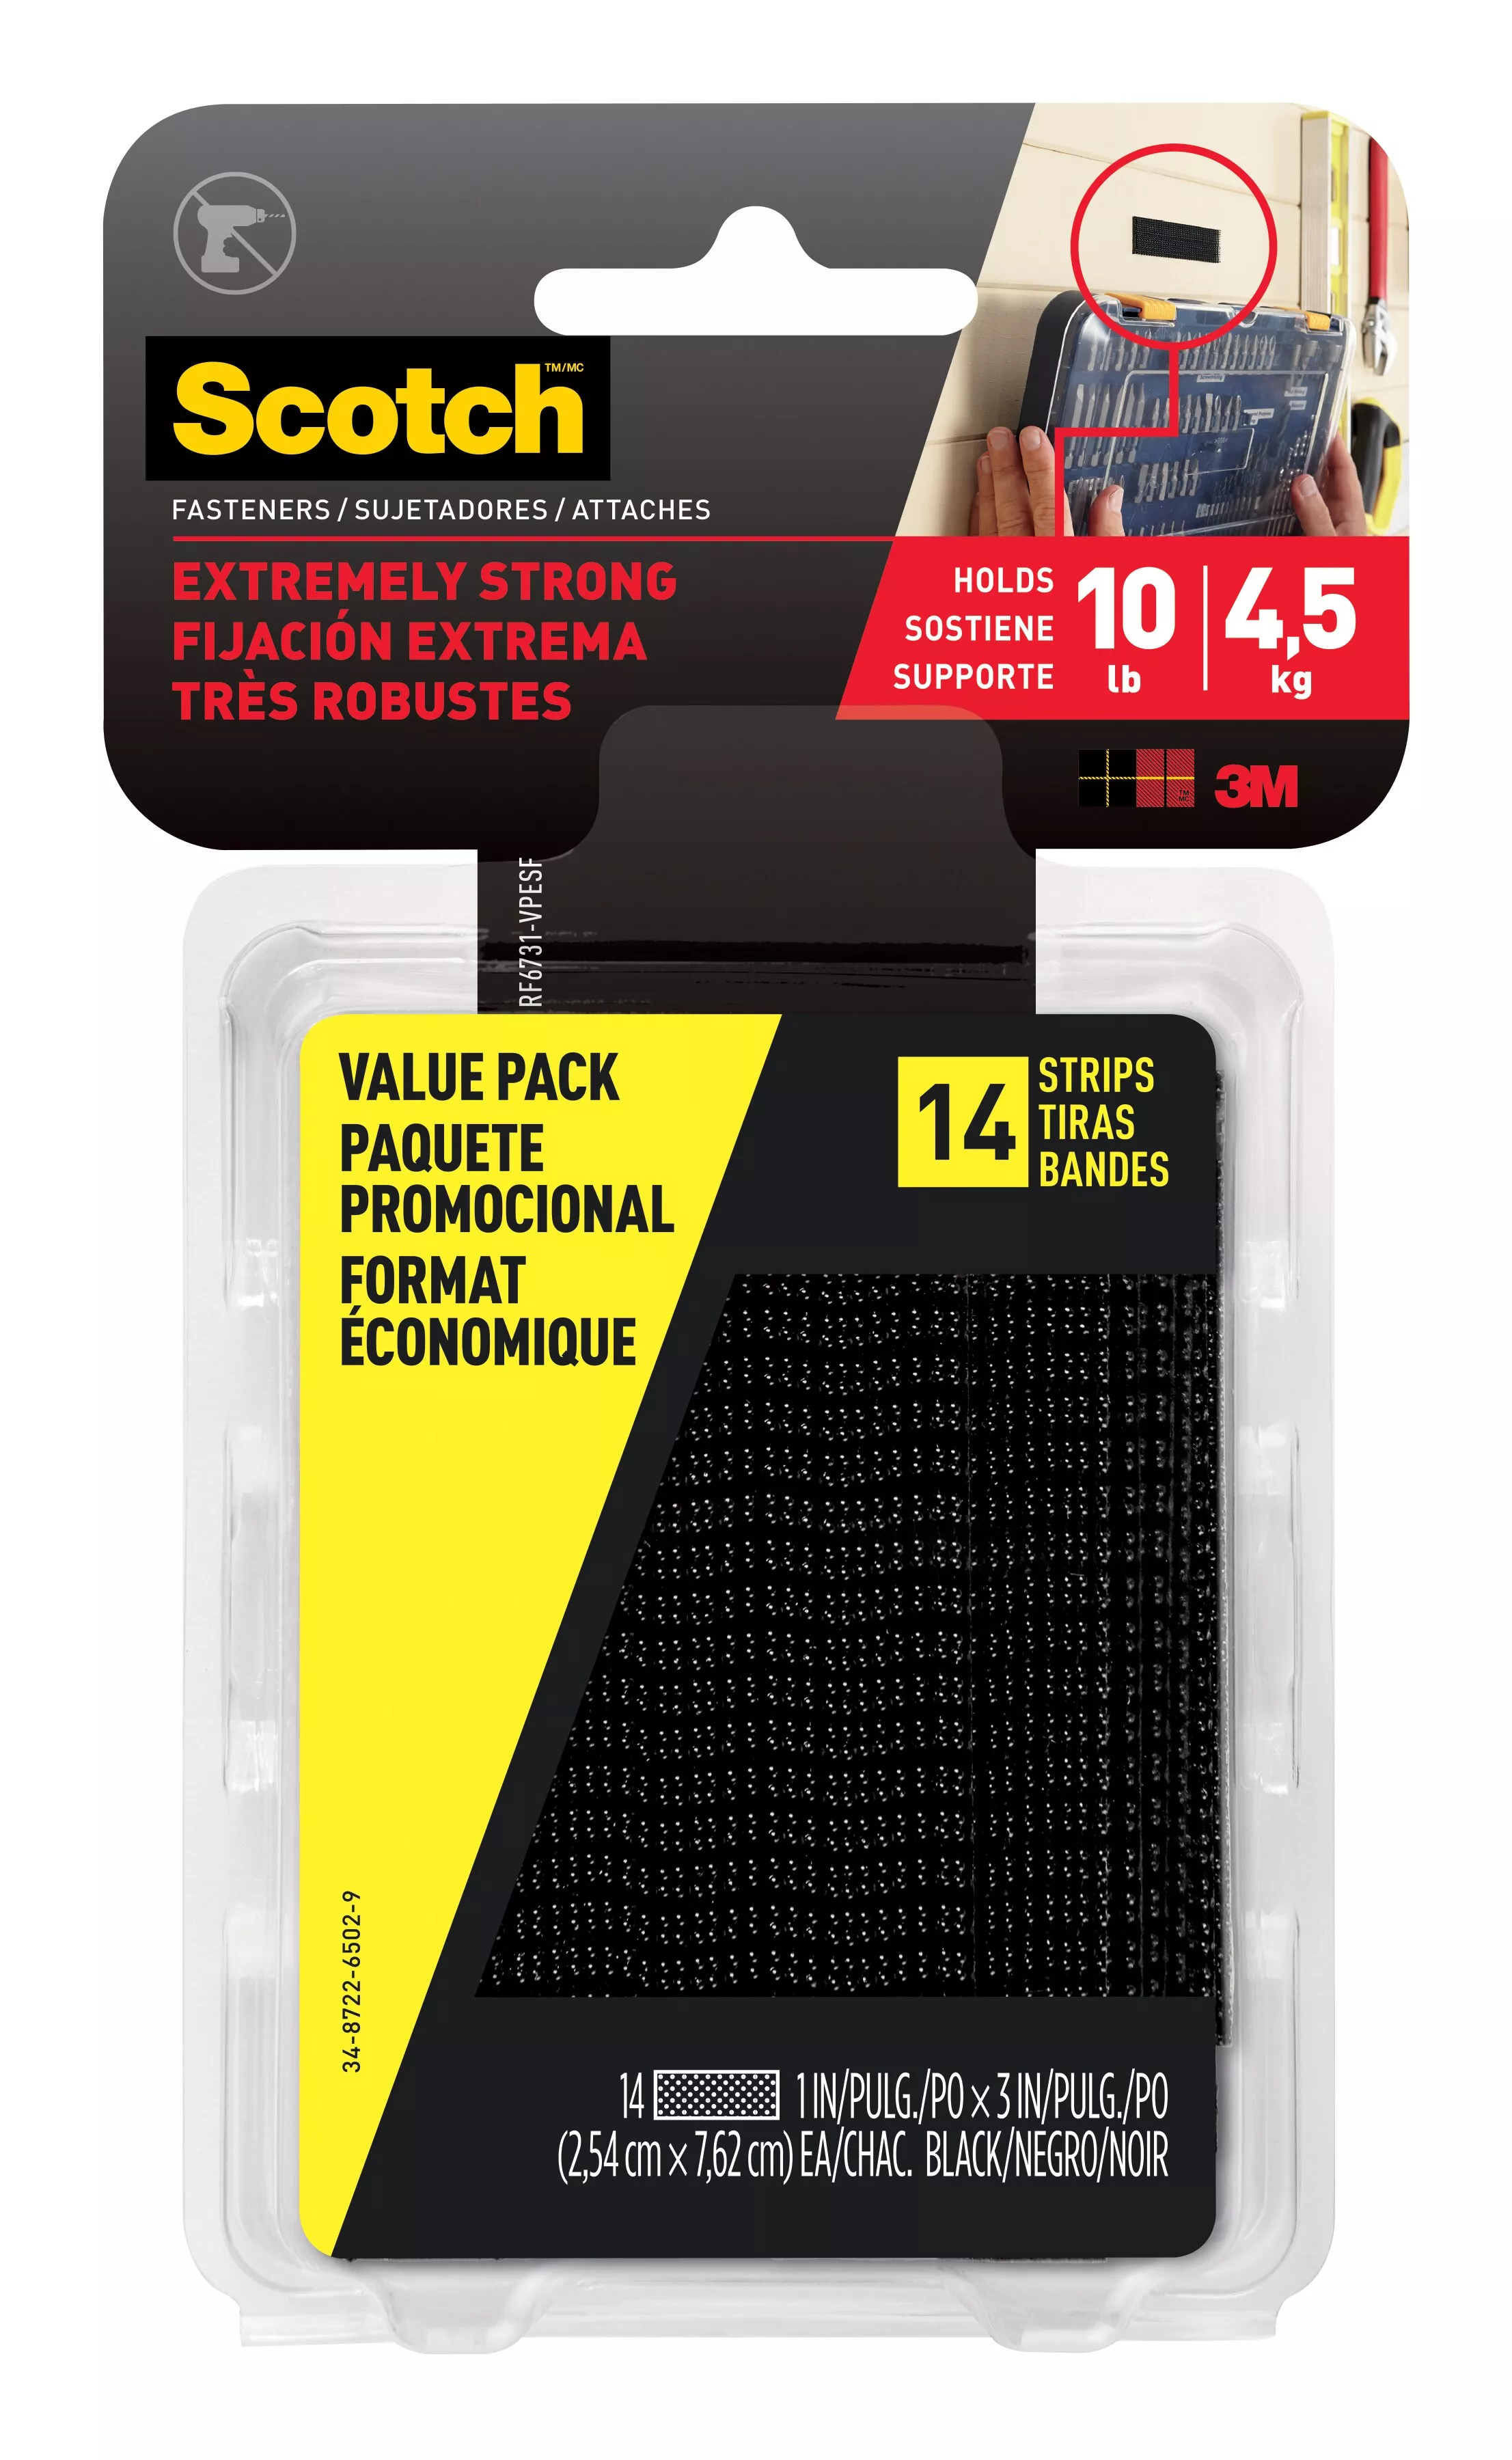 Scotch™ Extreme Fastener Mounting Strips Value Pack RF6731-VPESF, 1 in x
3 in (25,4 mm x 76,2 mm), Black, 14 Strips